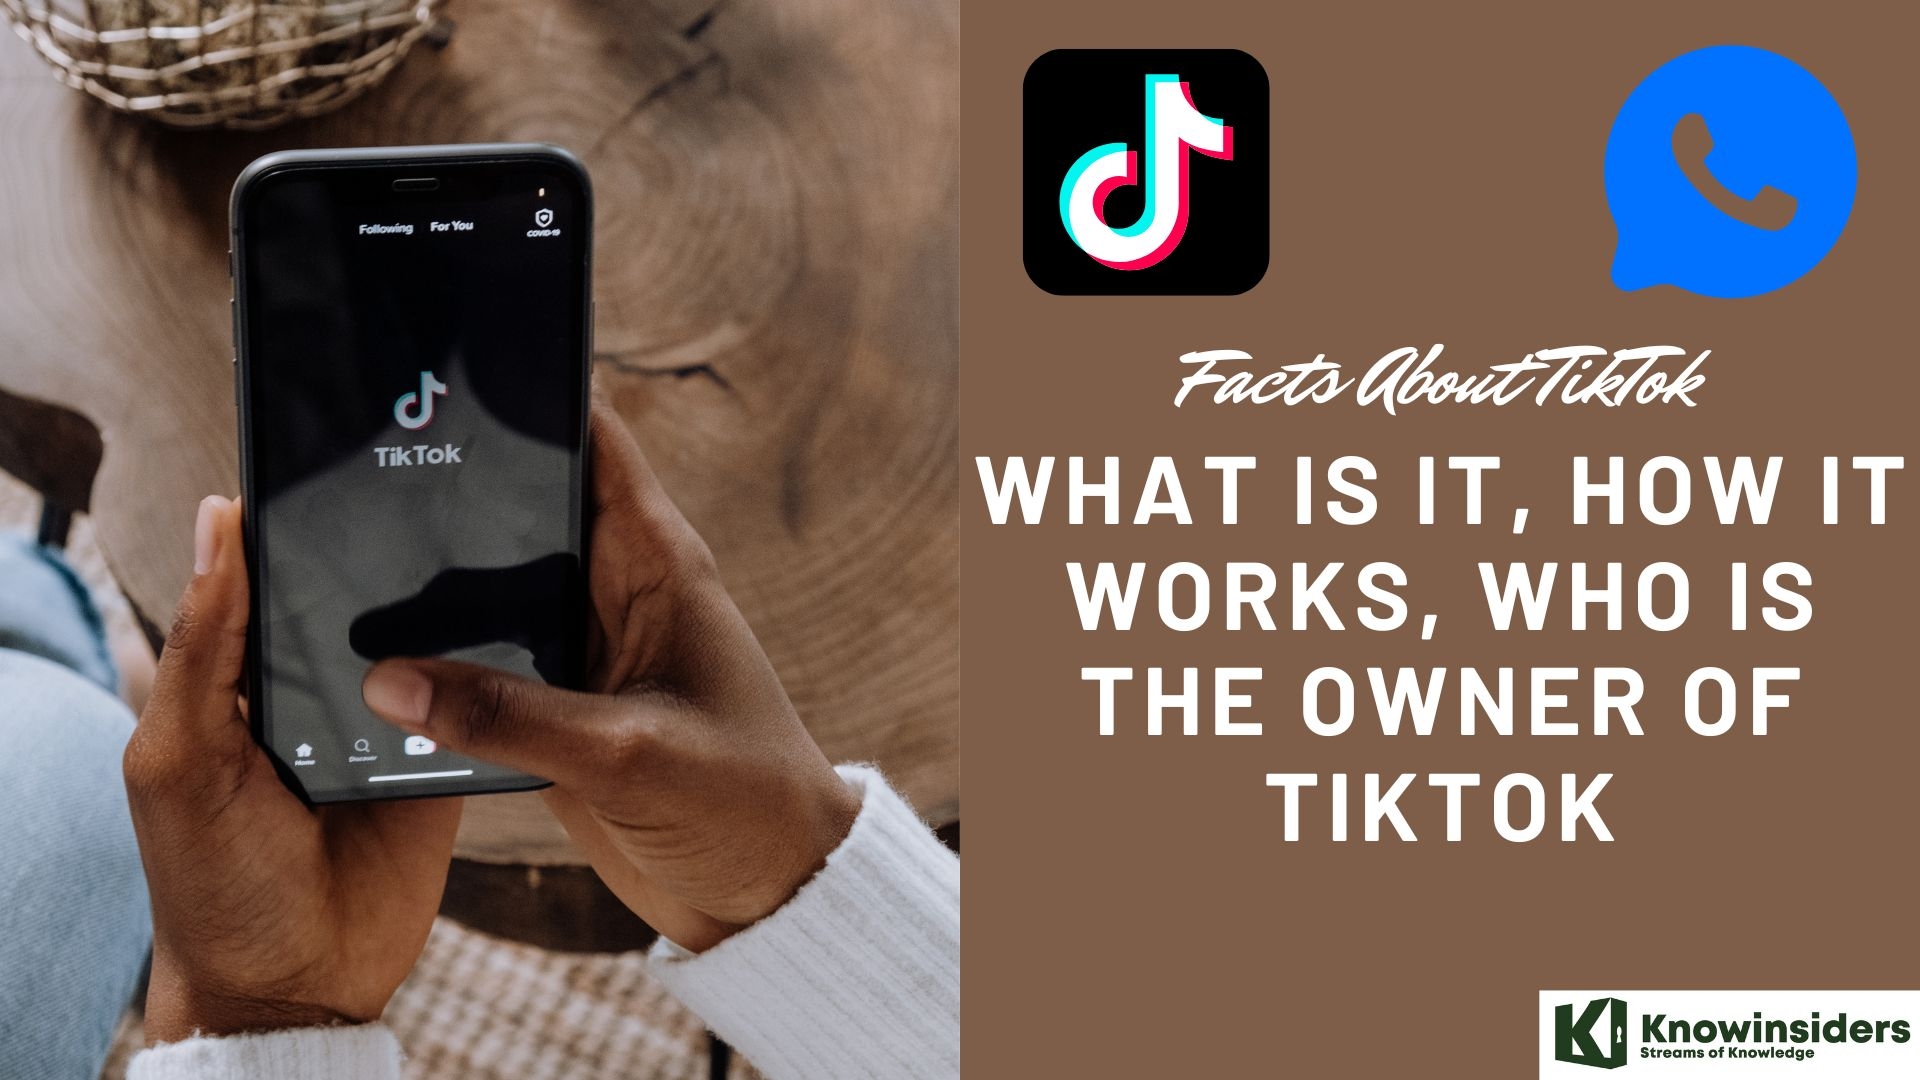 Facts About TikTok: What Is It, How It Works, Who Is The Owner Of Tiktok Knowinsiders.com 